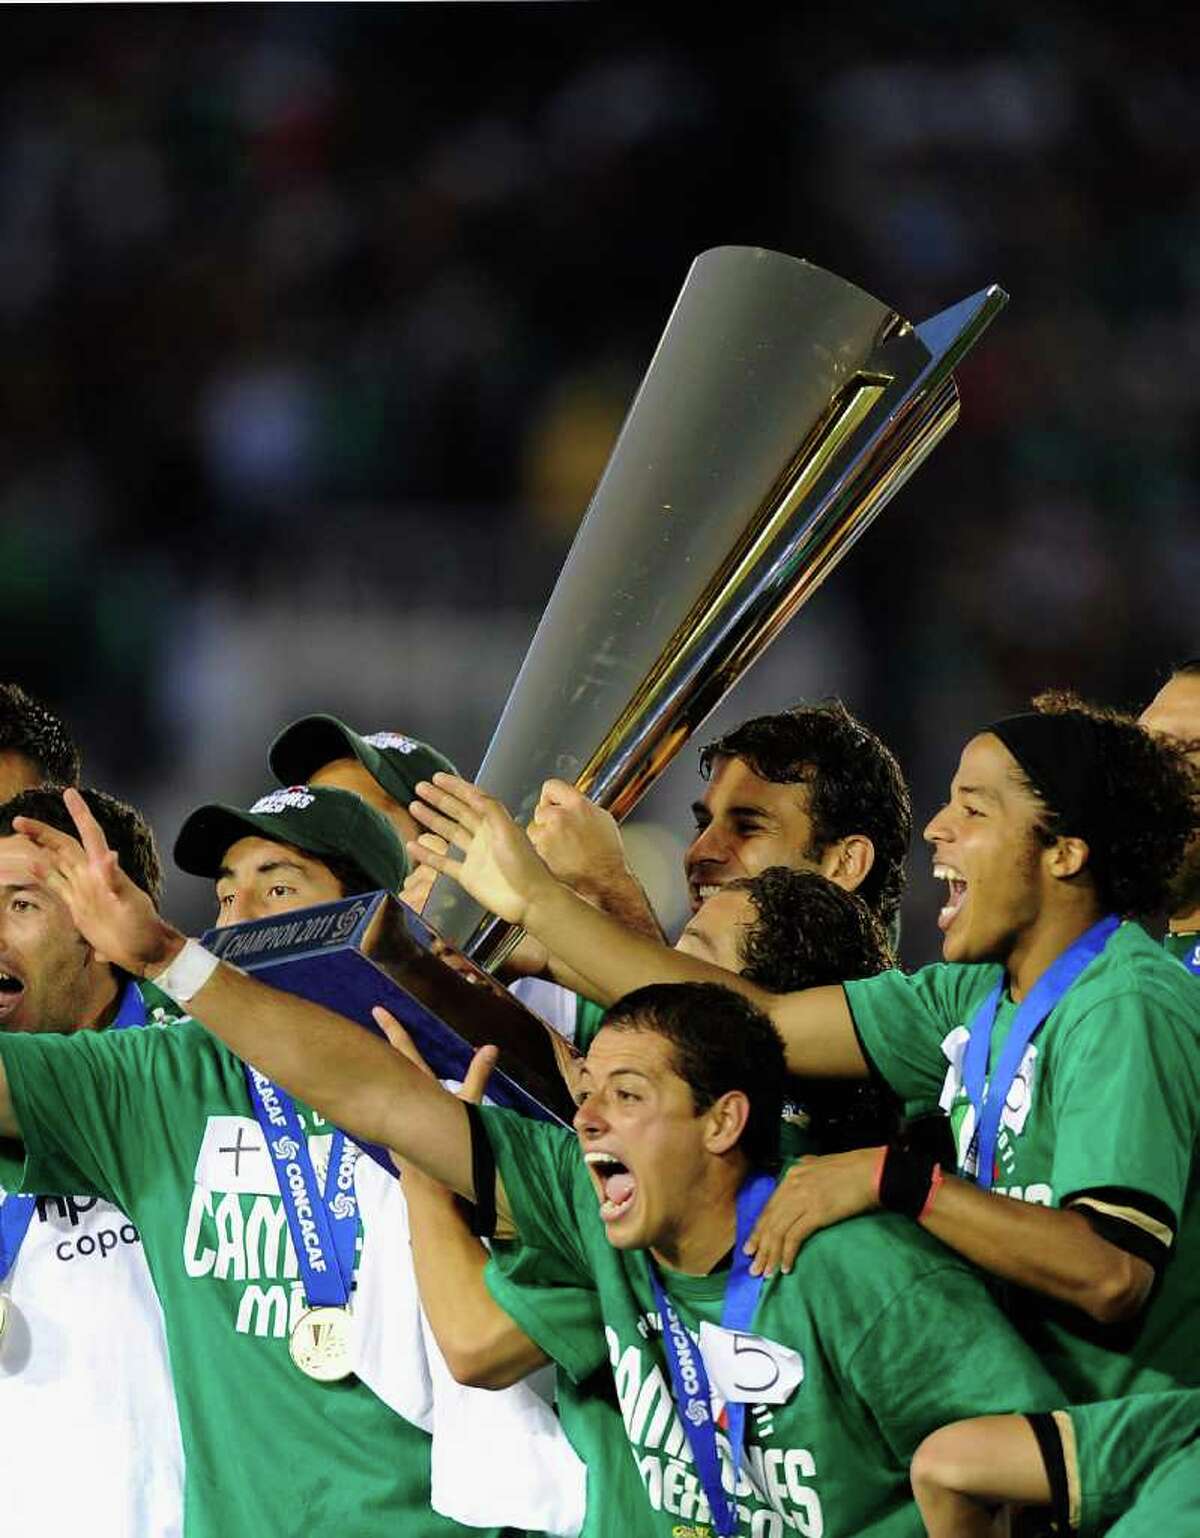 PASADENA, CA - JUNE 25: Mexico celebartes after defeating United States in the 2011 CONCACAF Gold Cup Championship at the Rose Bowl on June 25, 2011 in Pasadena, California. (Photo by Kevork Djansezian/Getty Images)